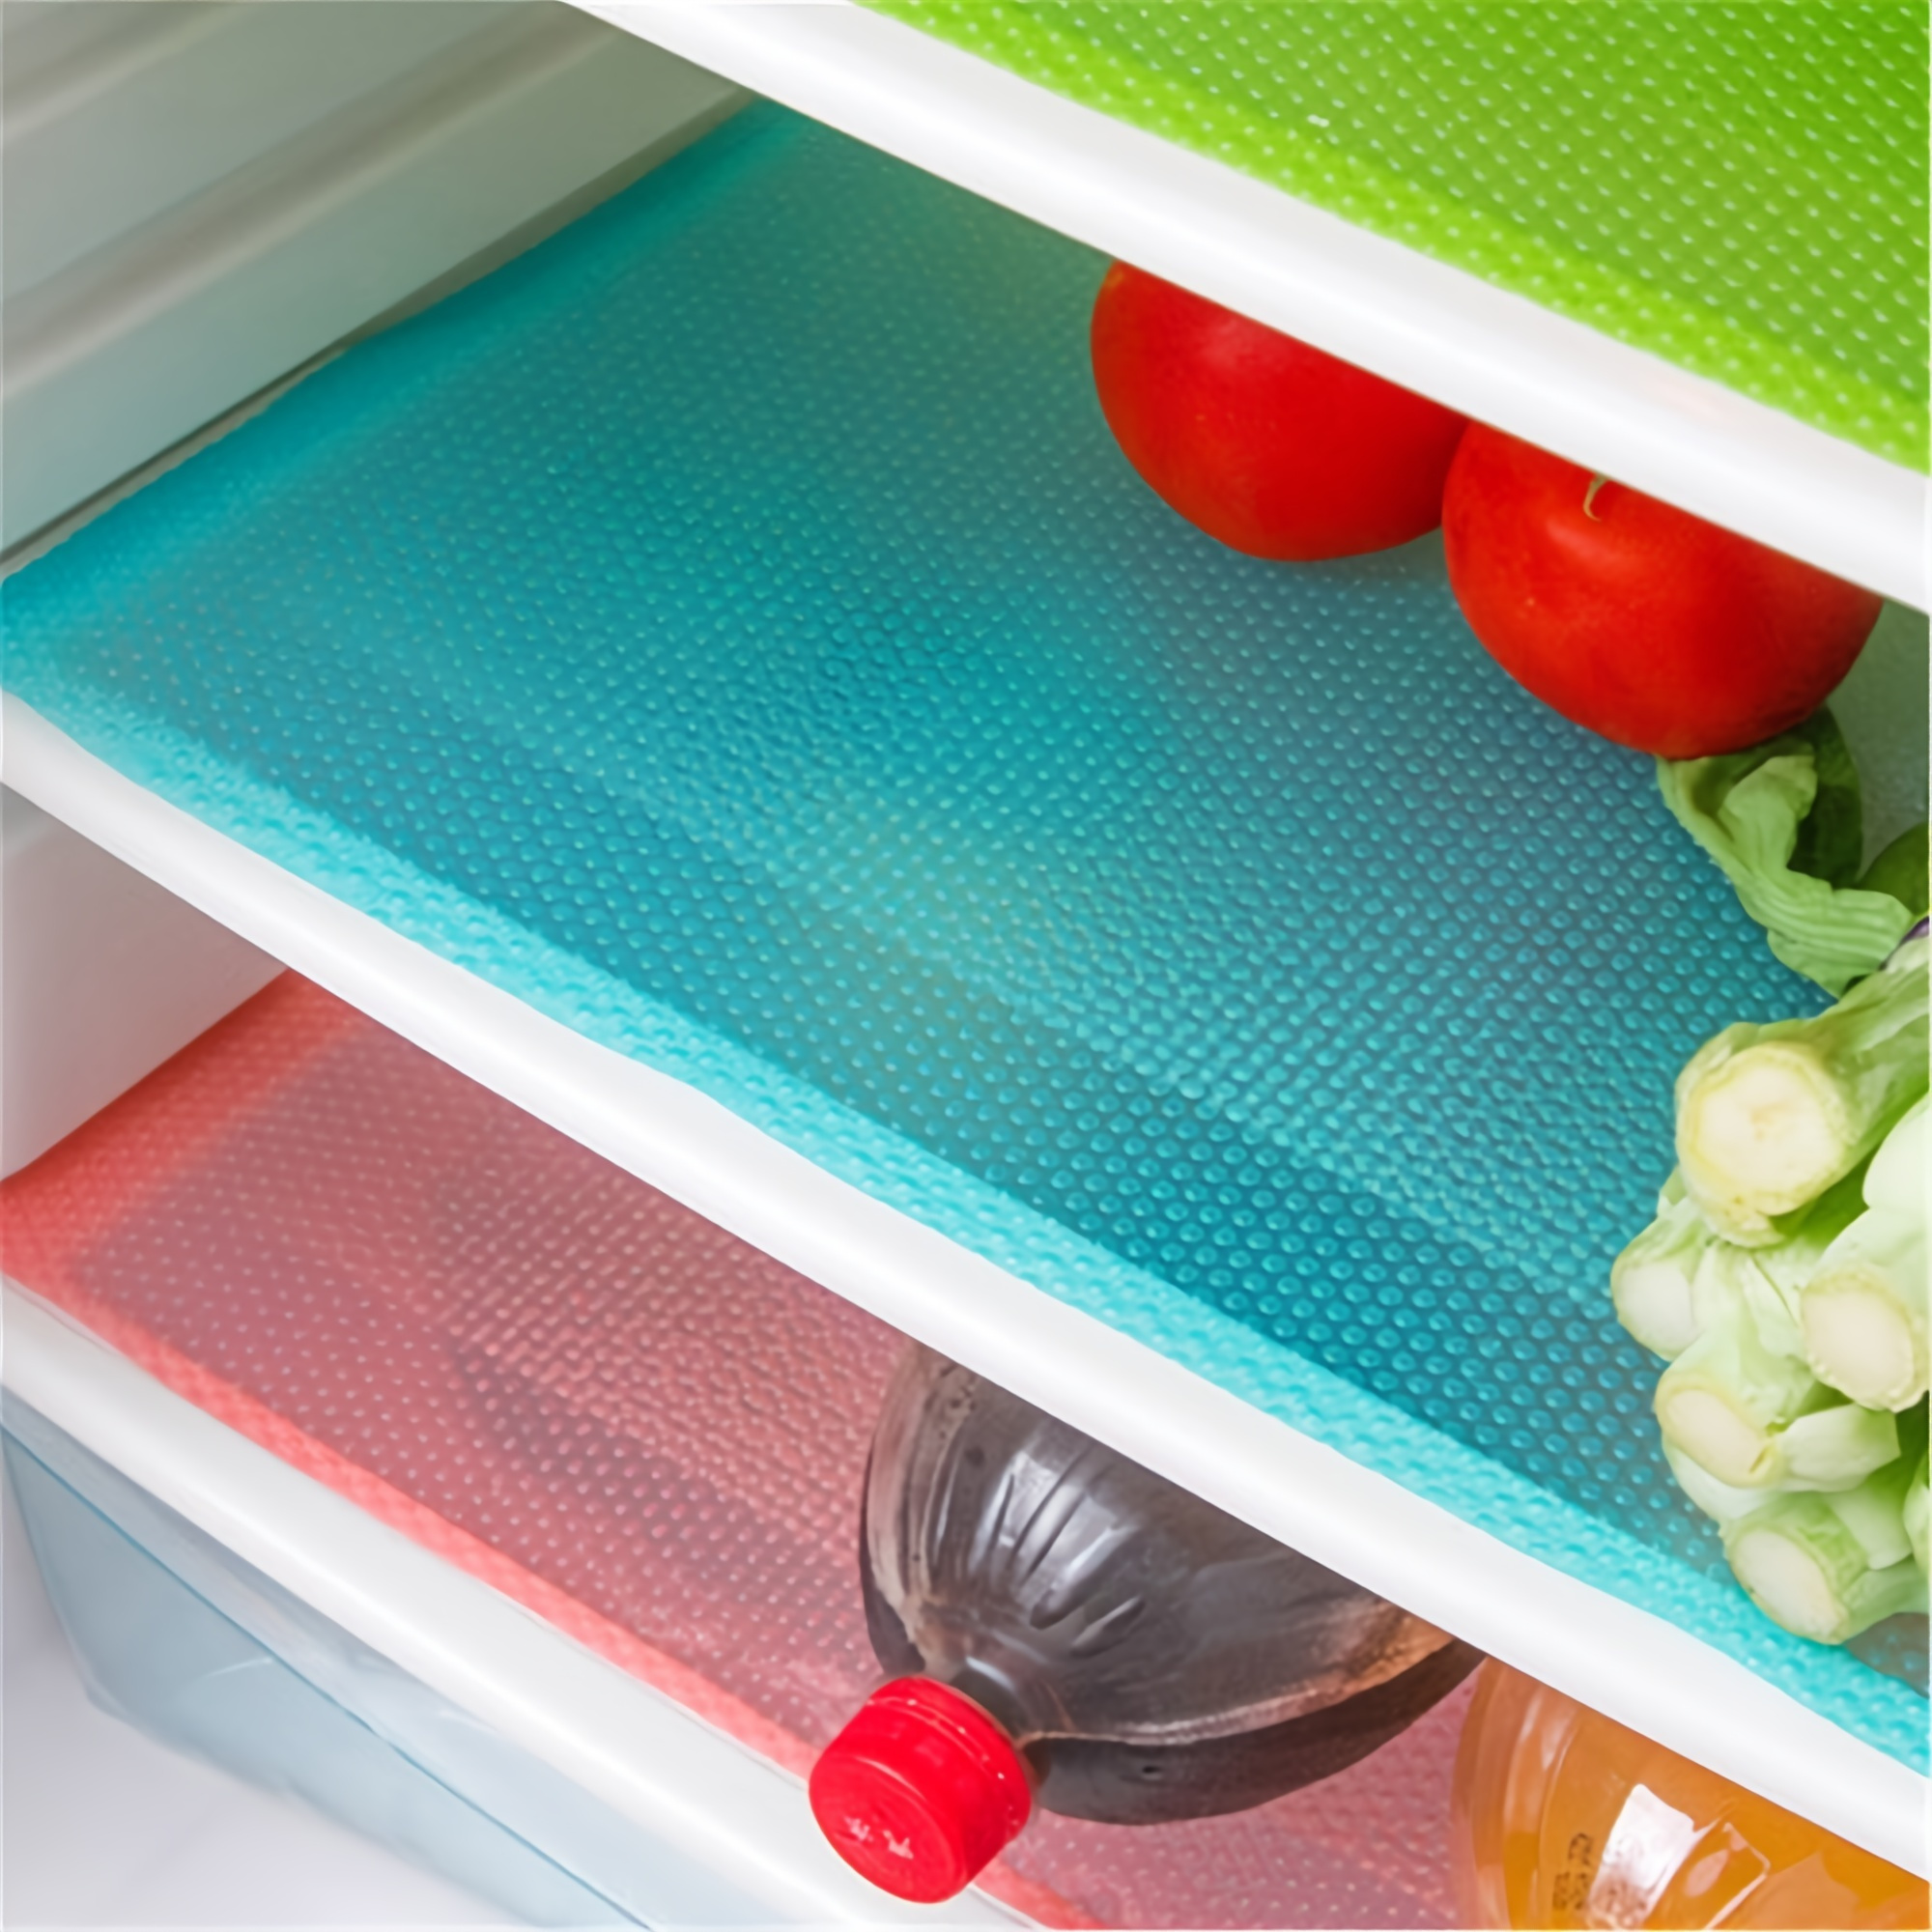 

4pcs Refrigerator Liners Mats: Washable, Waterproof & Oilproof - Perfect For Shelves, Freezer, Cupboard, Cabinet & Drawer!